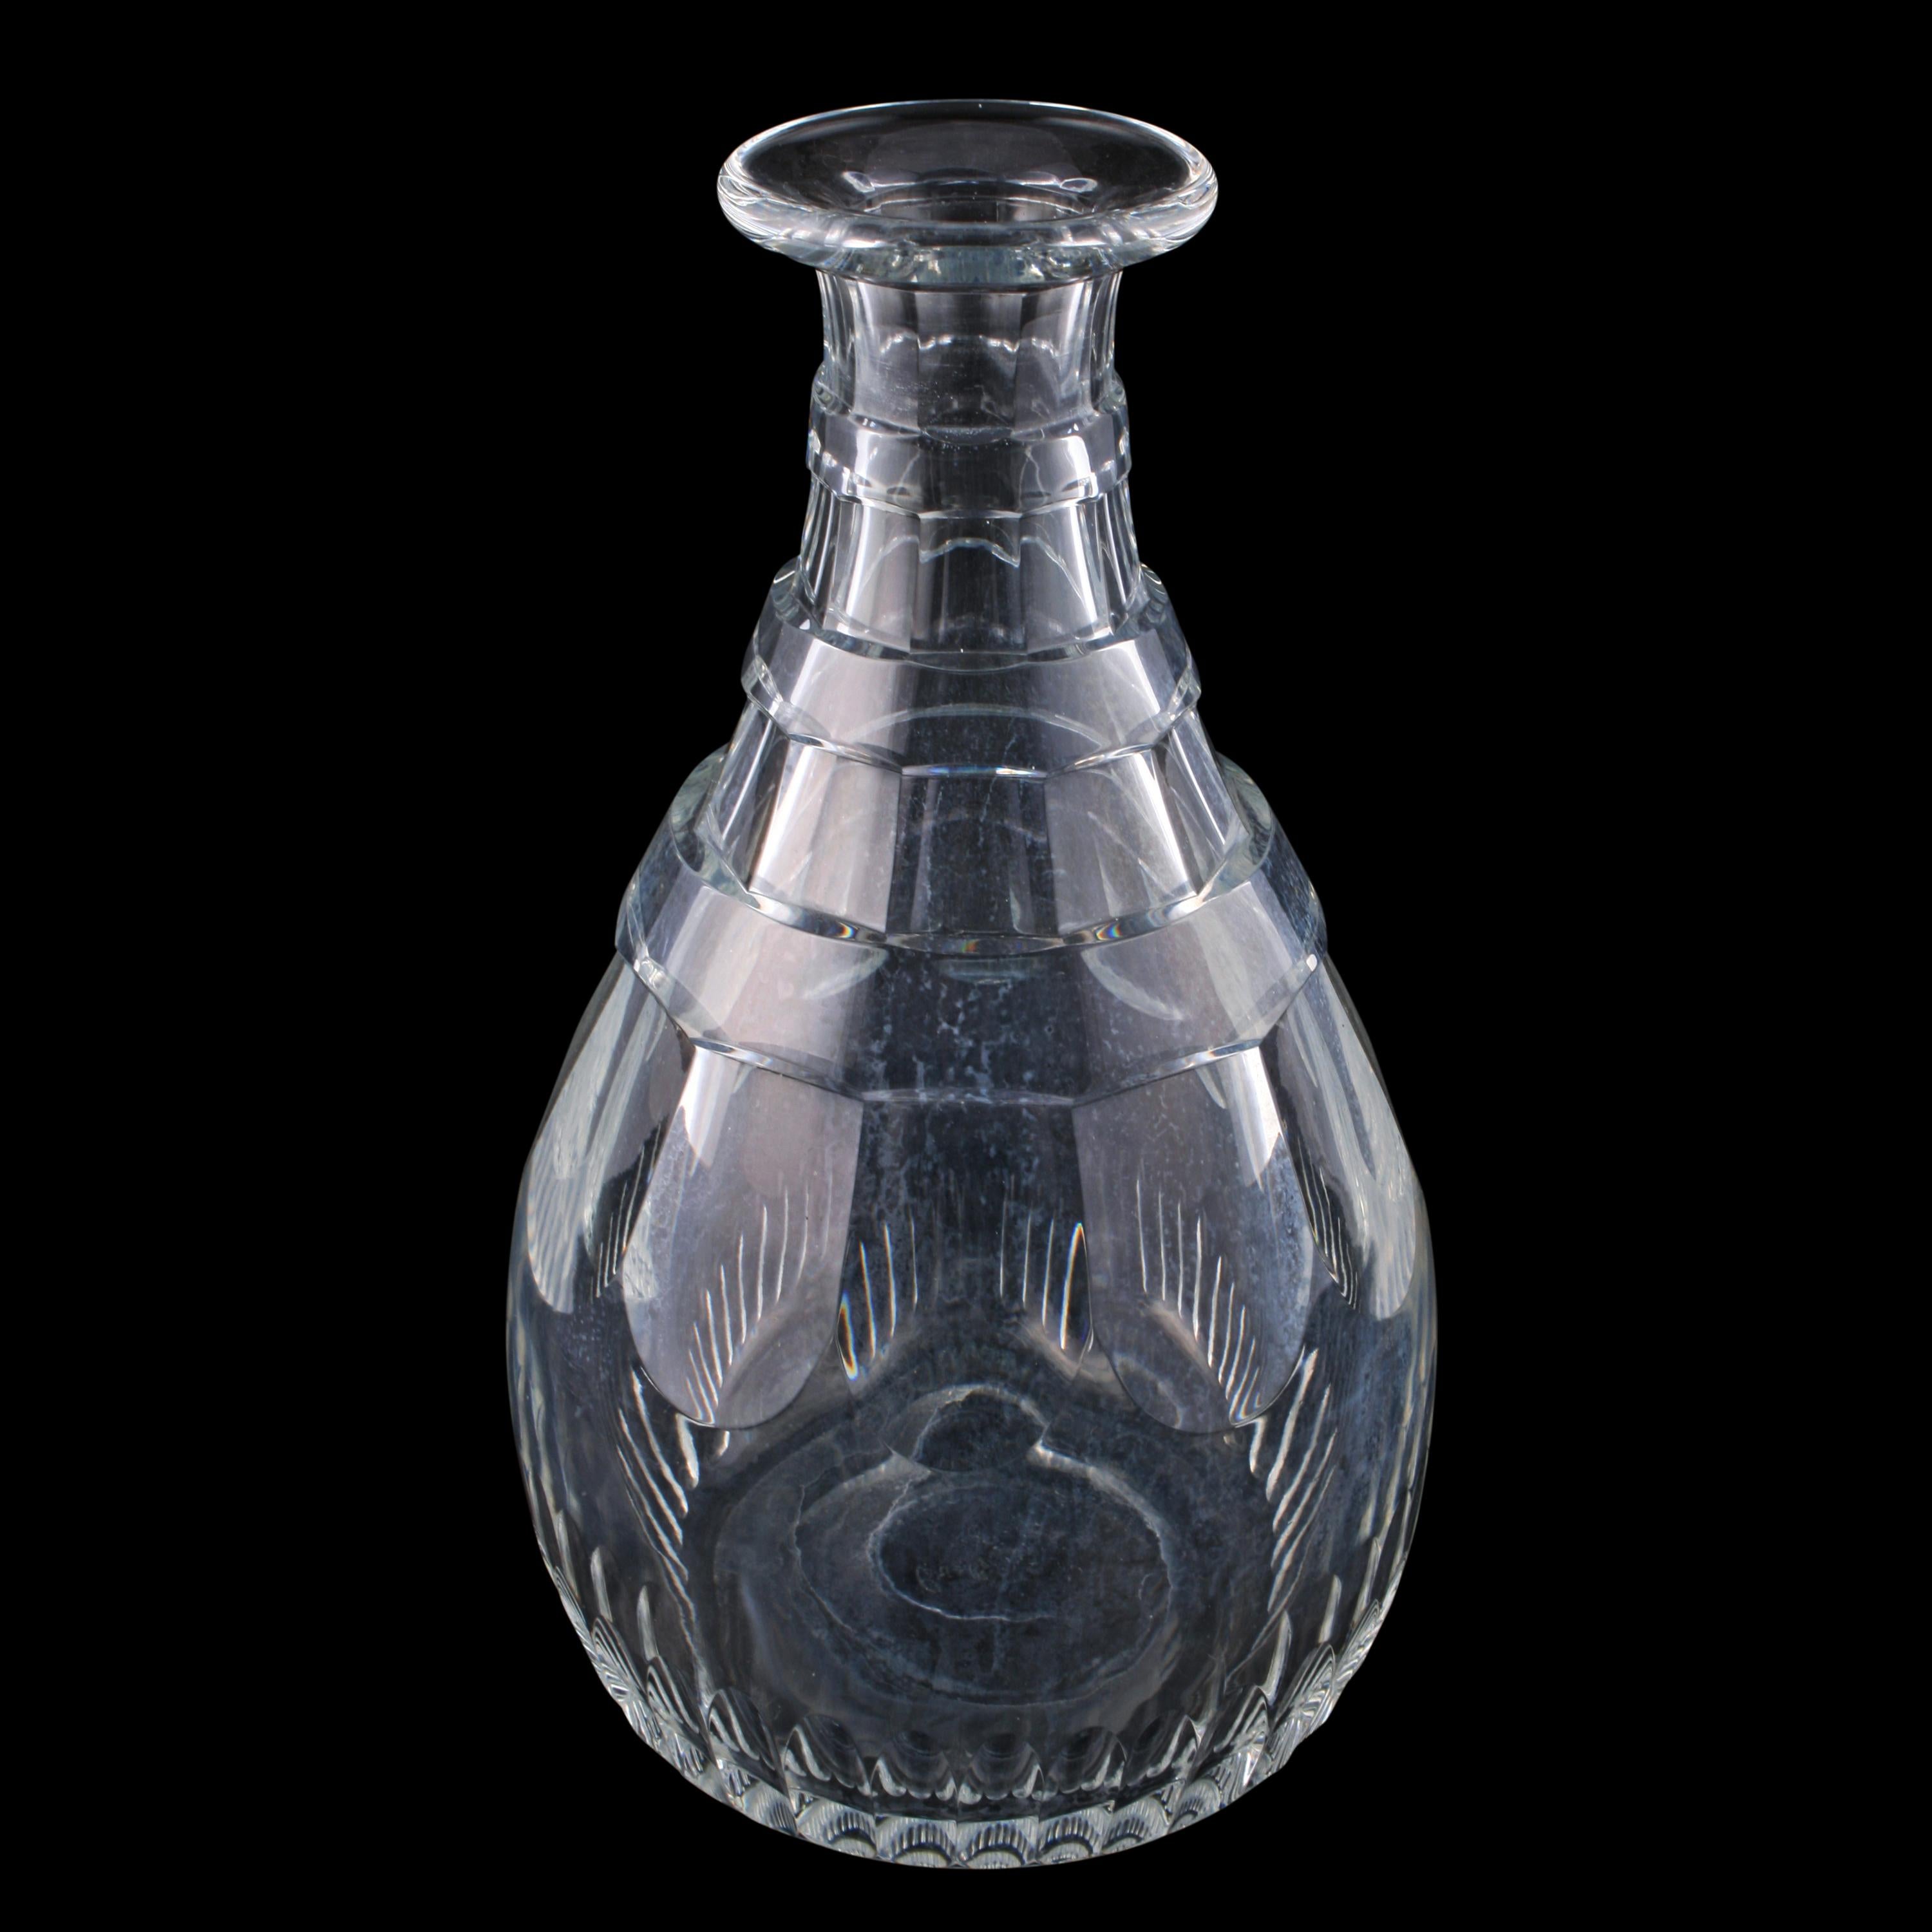 An early 20th century Edwardian magnum decanter.

The decanter is facet cut with a triple ring neck, a lozenge shaped stopper and a ground pontil mark.

The decanter is in good condition with some wear to the base as expected, circa